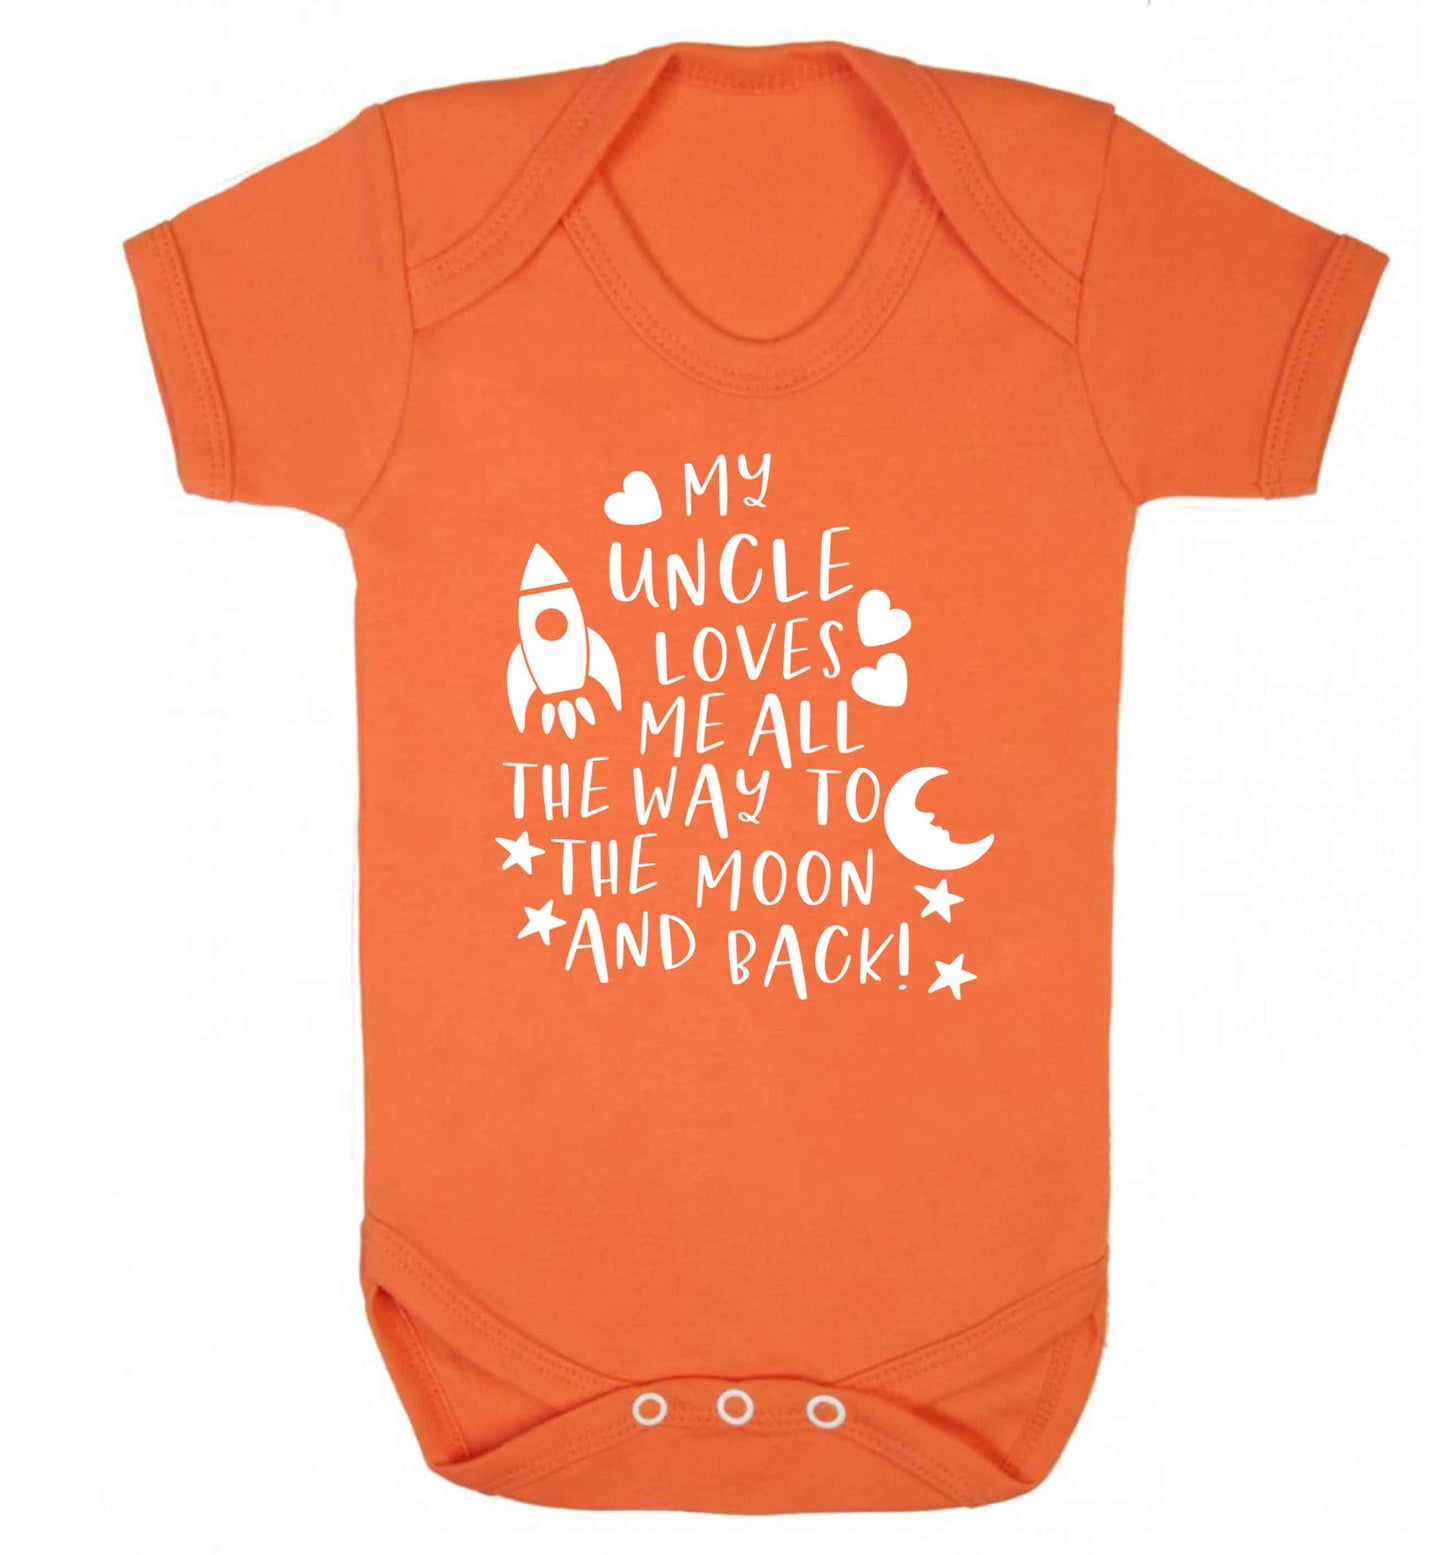 My uncle loves me all the way to the moon and back Baby Vest orange 18-24 months